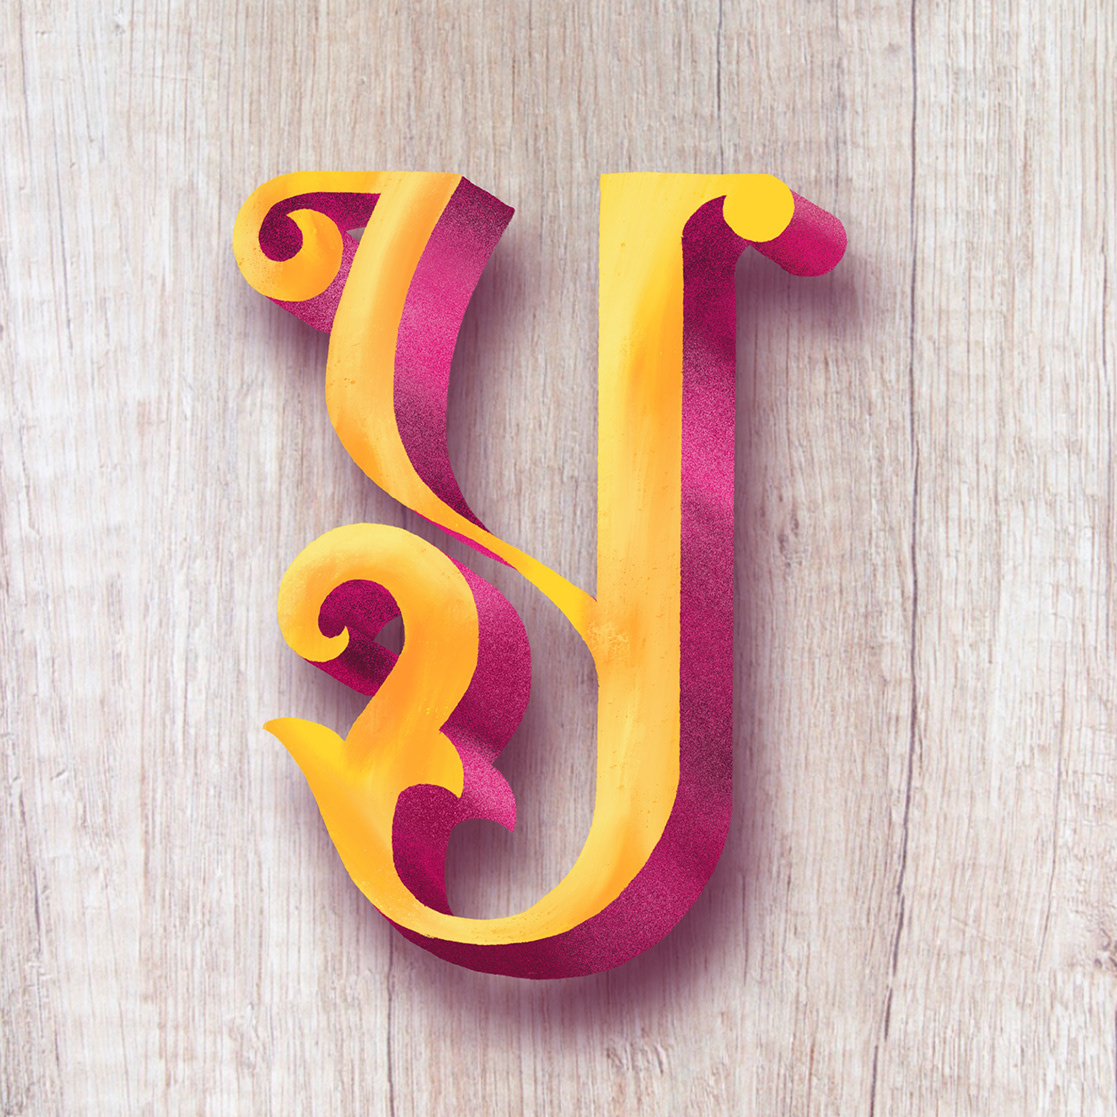 36daysoftype experimental font lettering type typedesign typo typography   vernacular